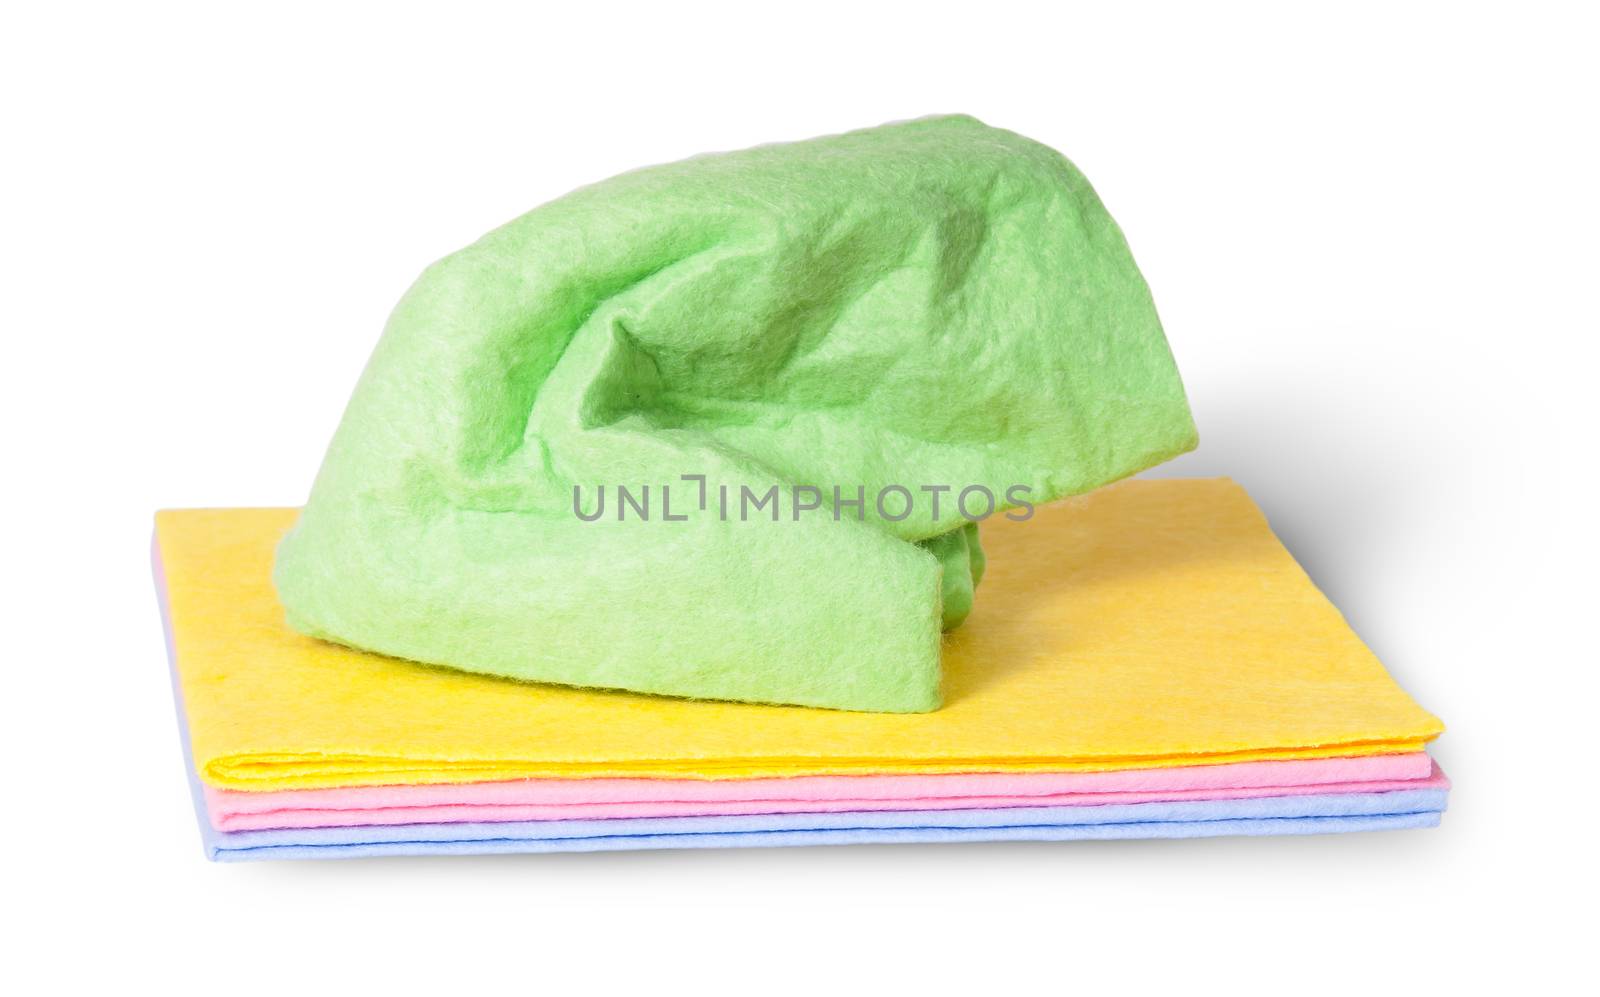 Multicolored cleaning cloths crumpled on top by Cipariss